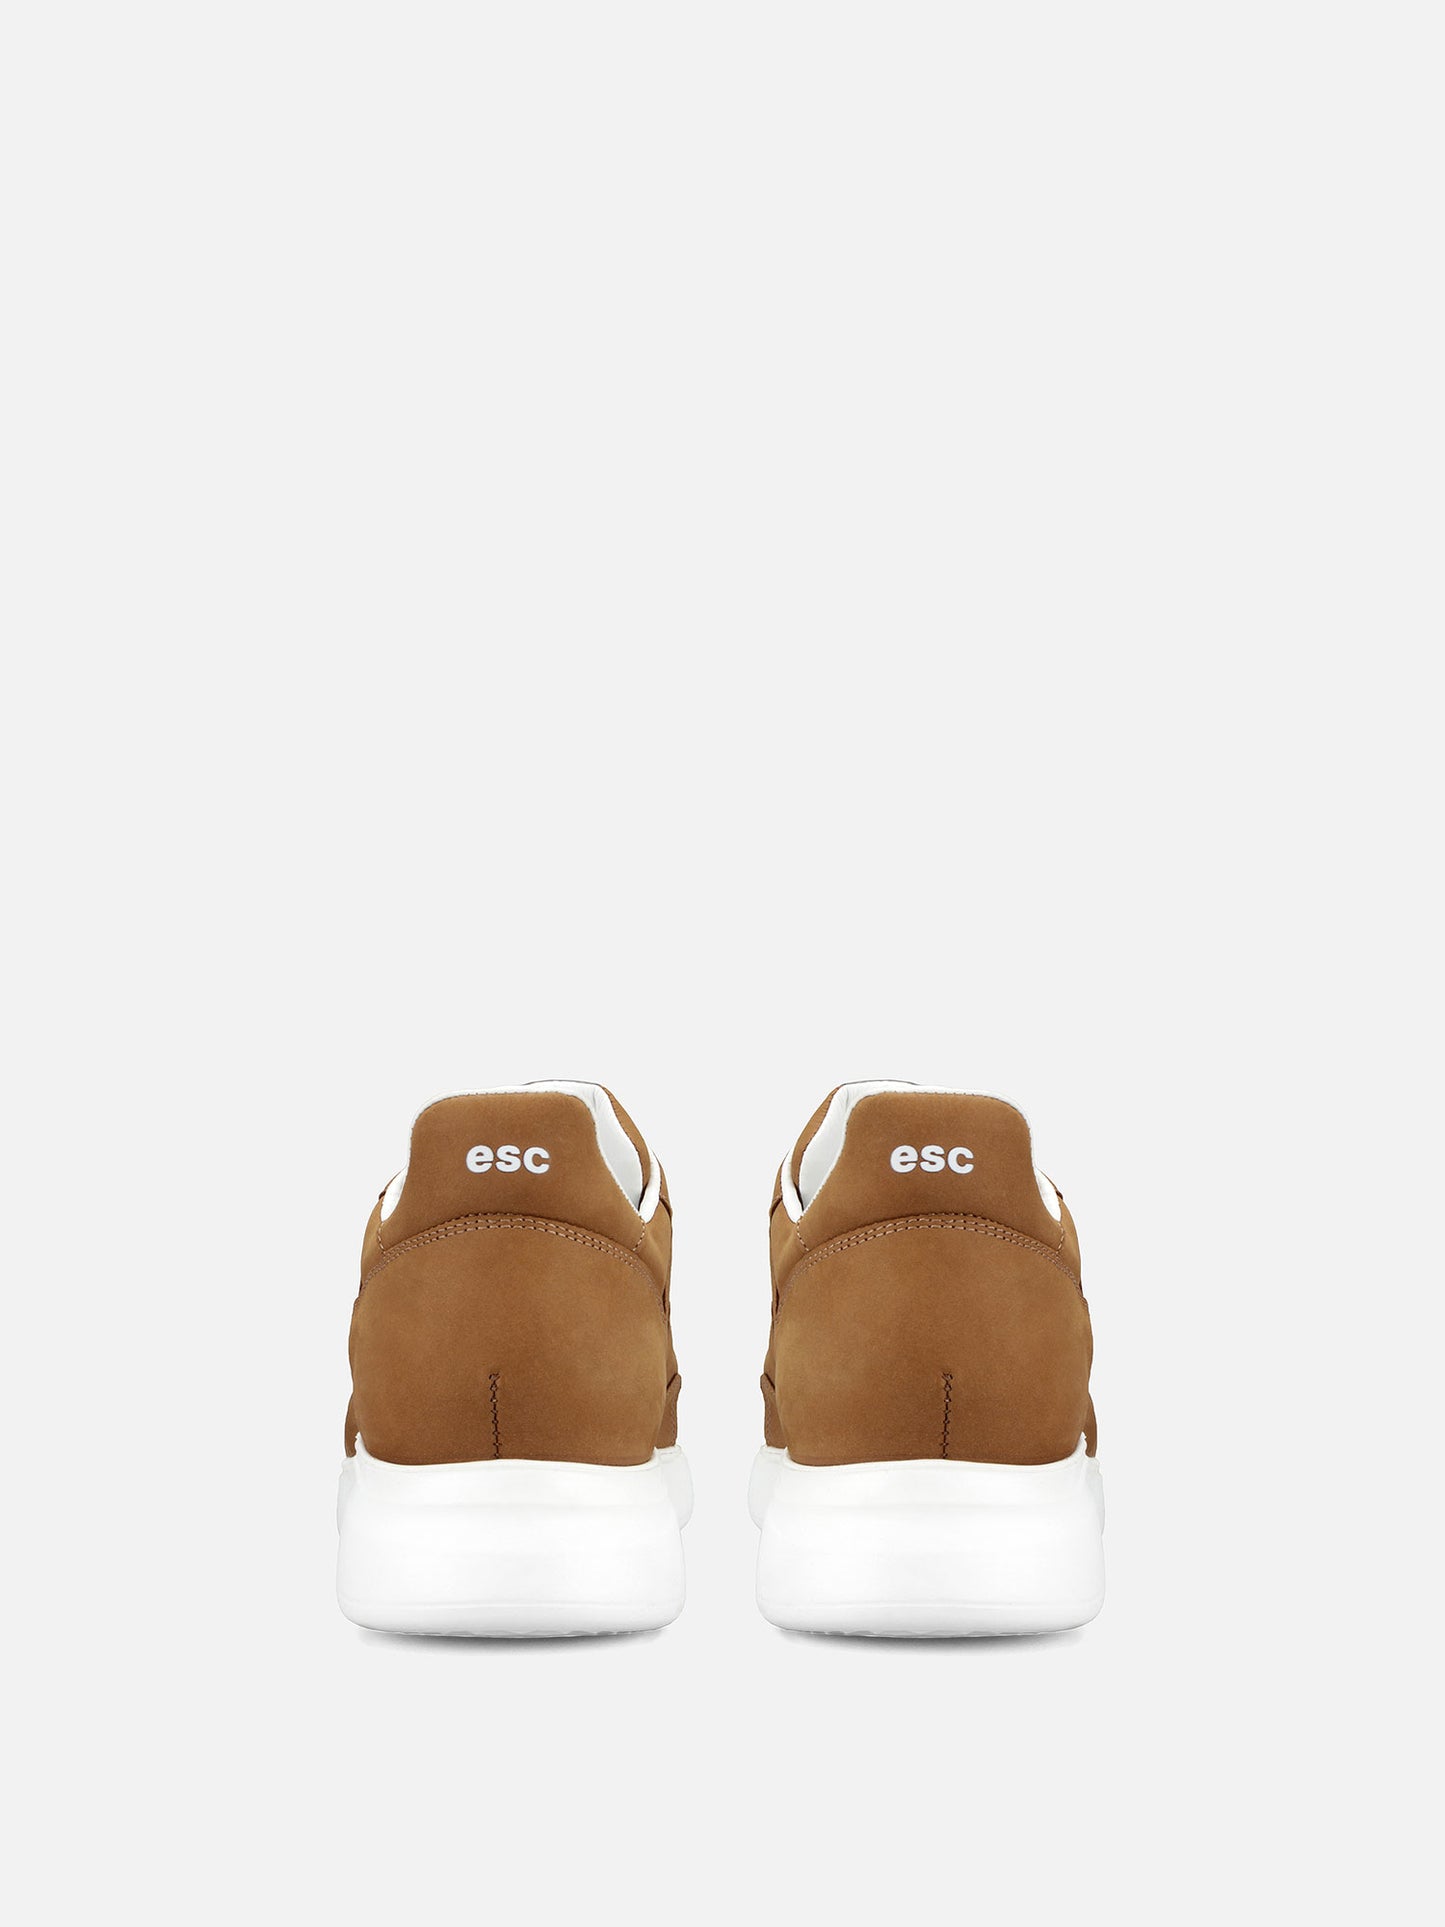 DRAG Trainer Leather Sneakers - Cognac